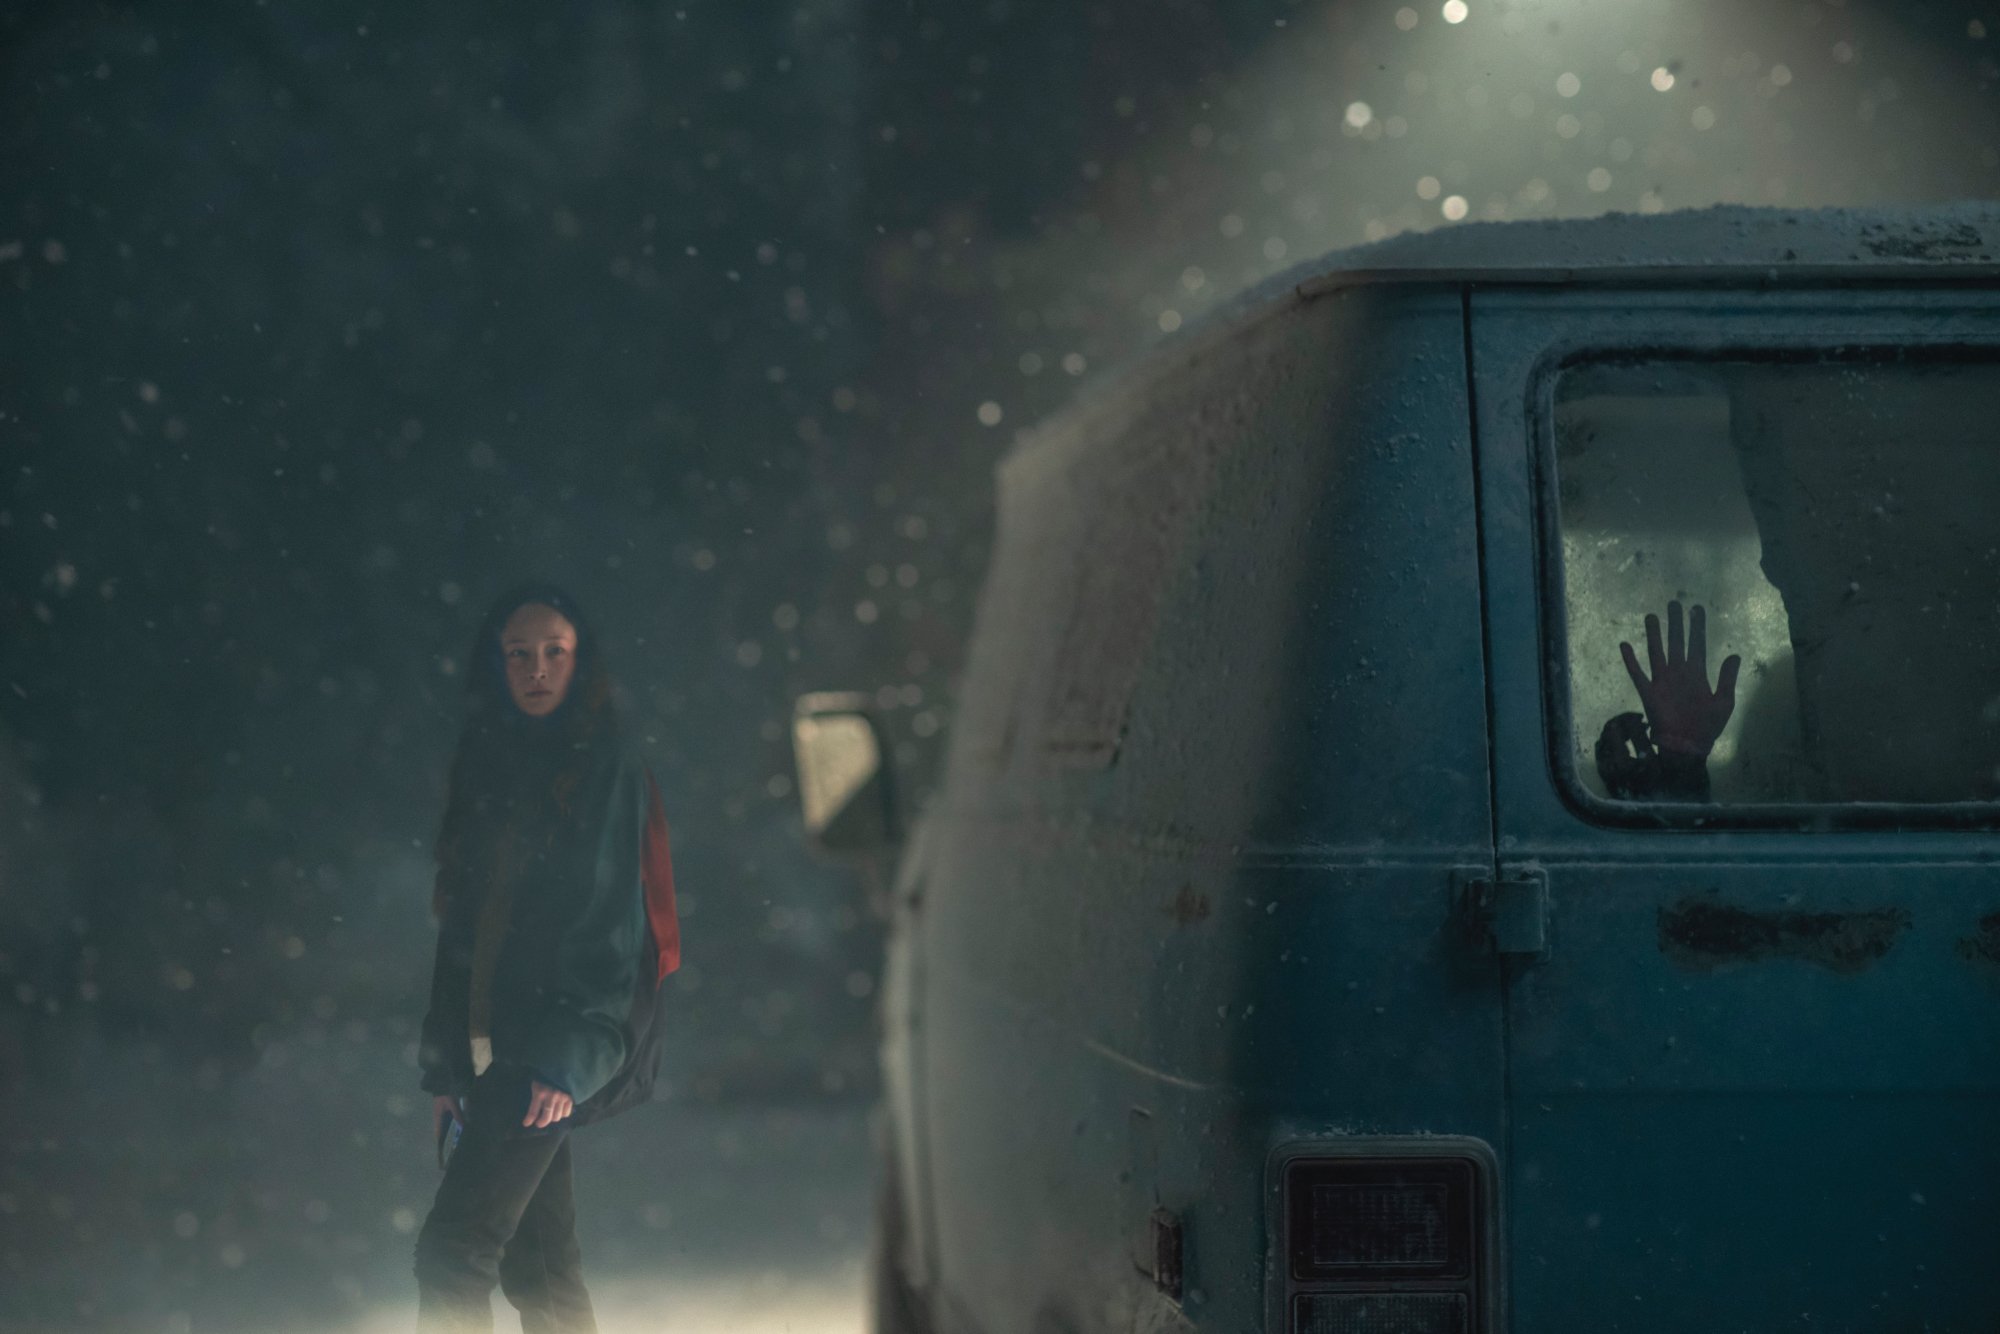 'No Exit' Havana Rose Liu as Darby walking in the snow next to a van with a hand against the glass of the back window